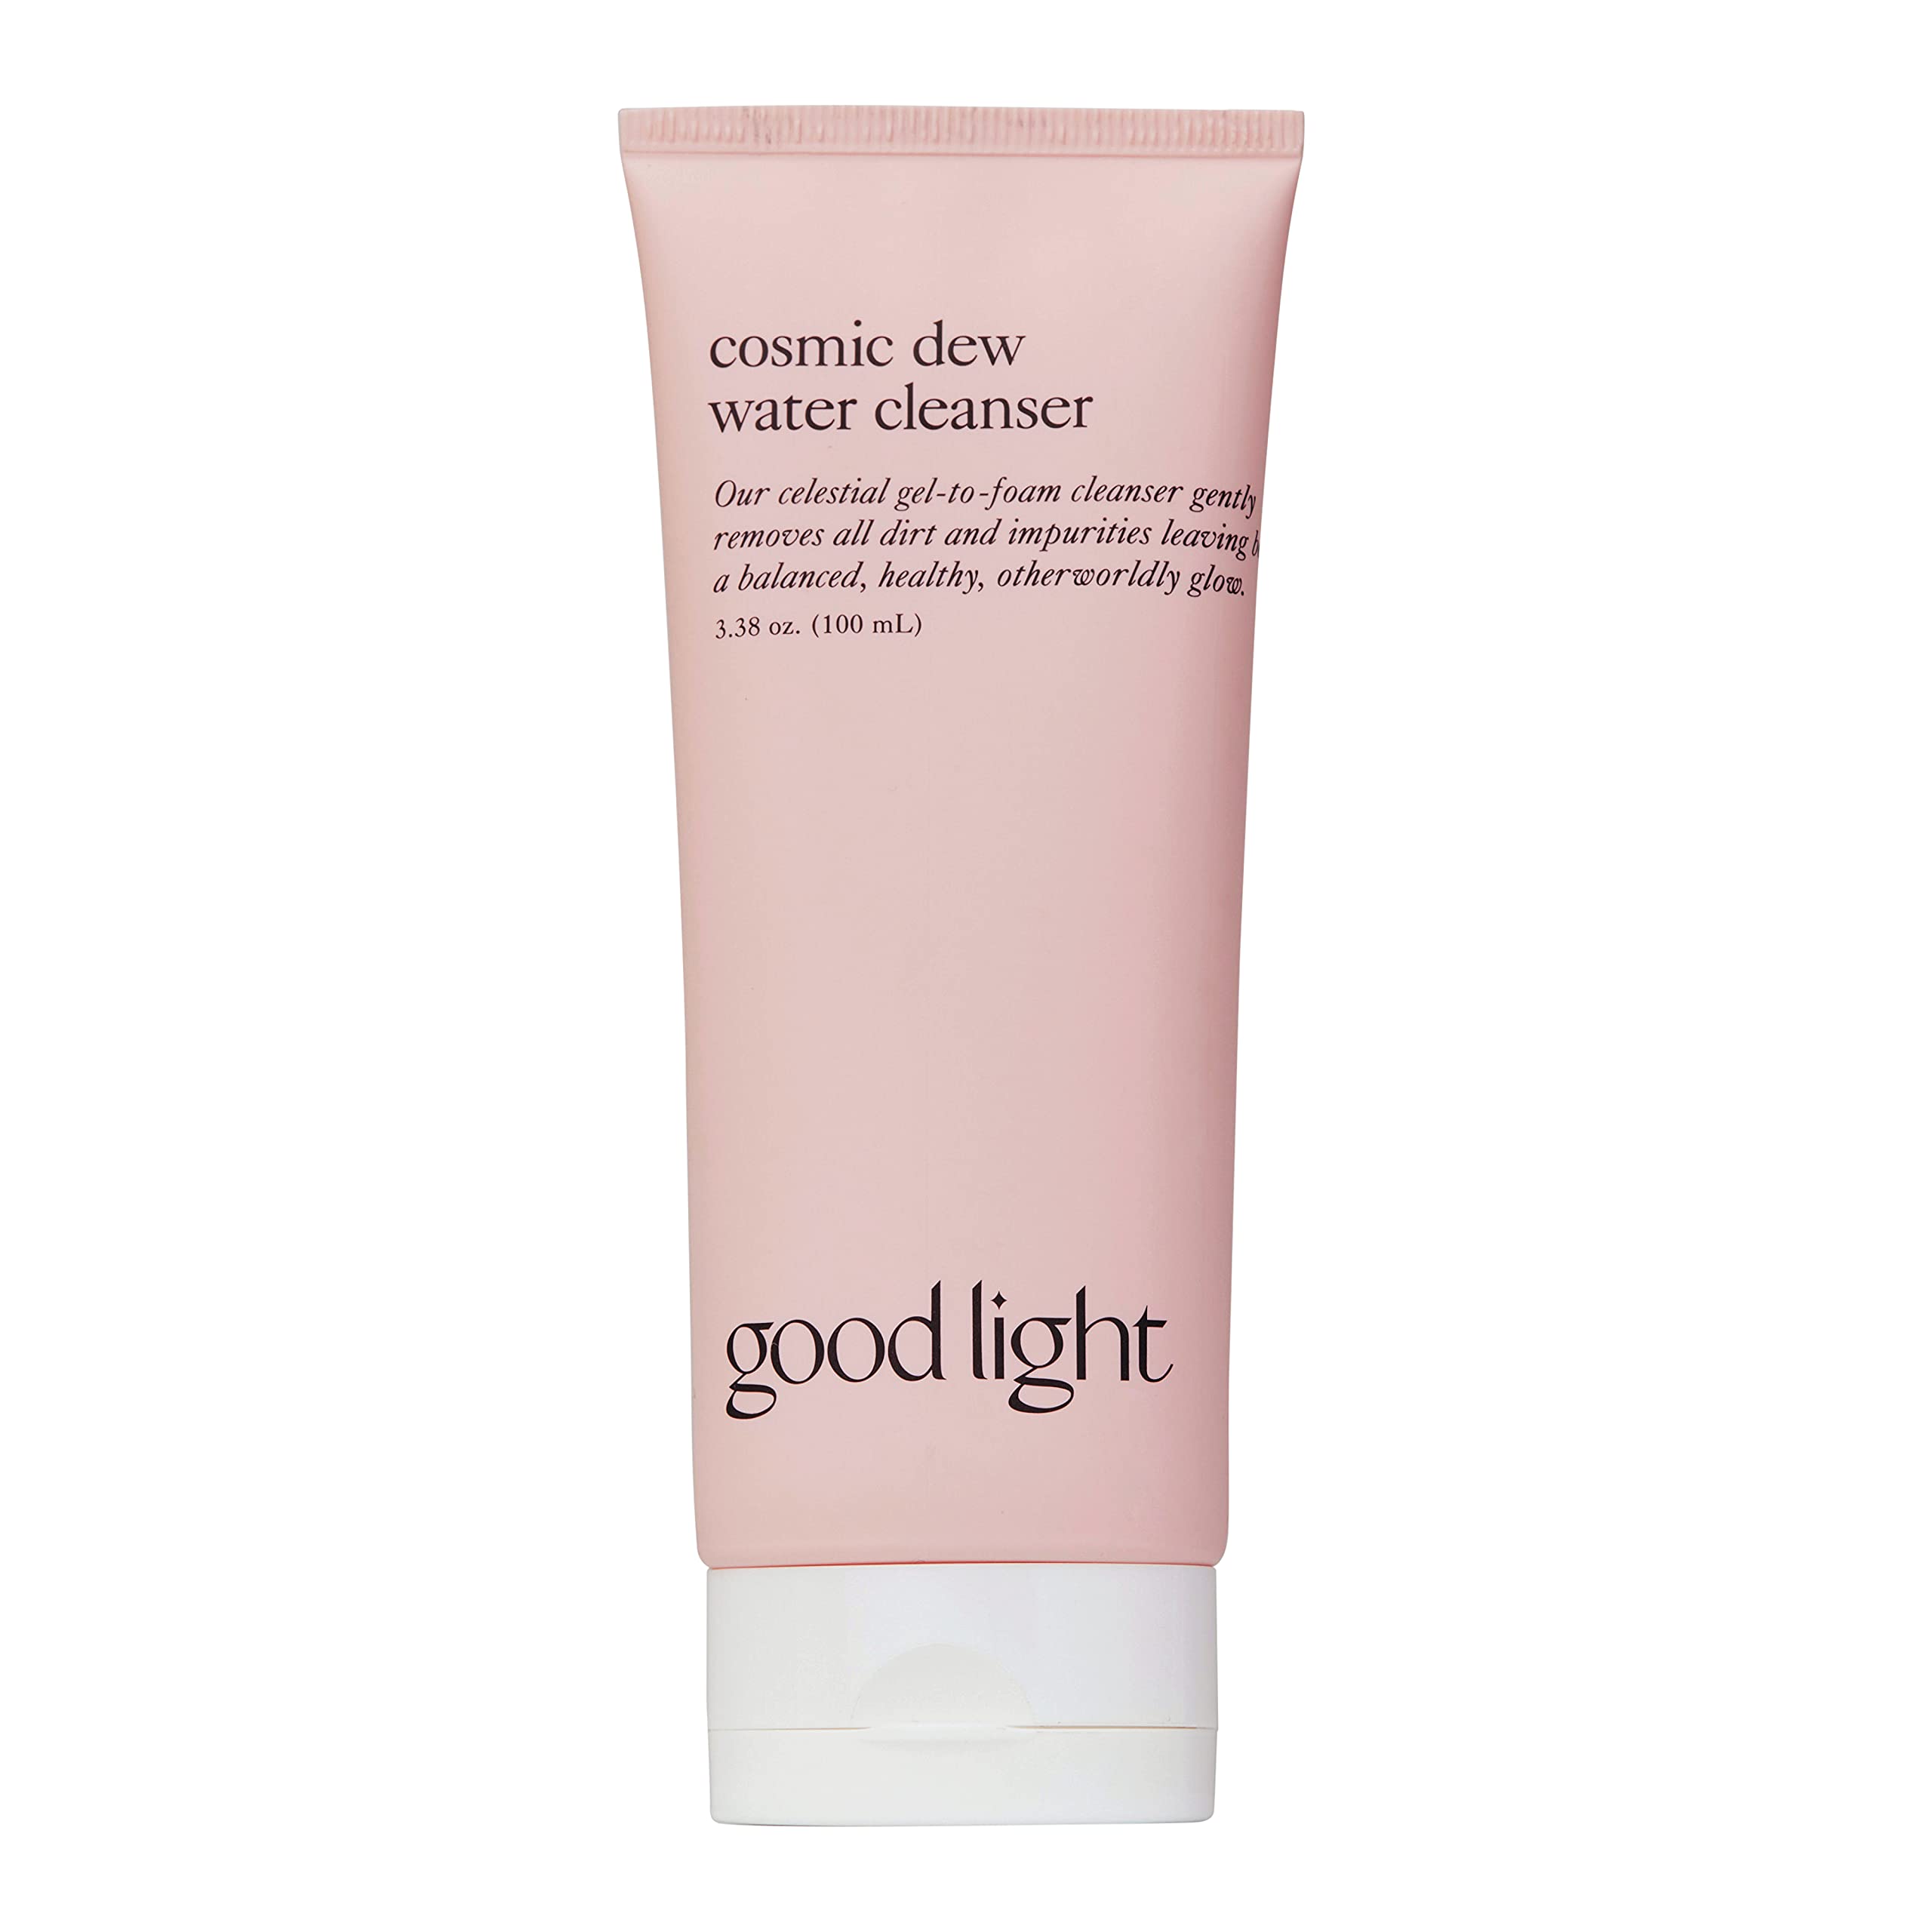 A pink bottle of cleanser from Good Light.